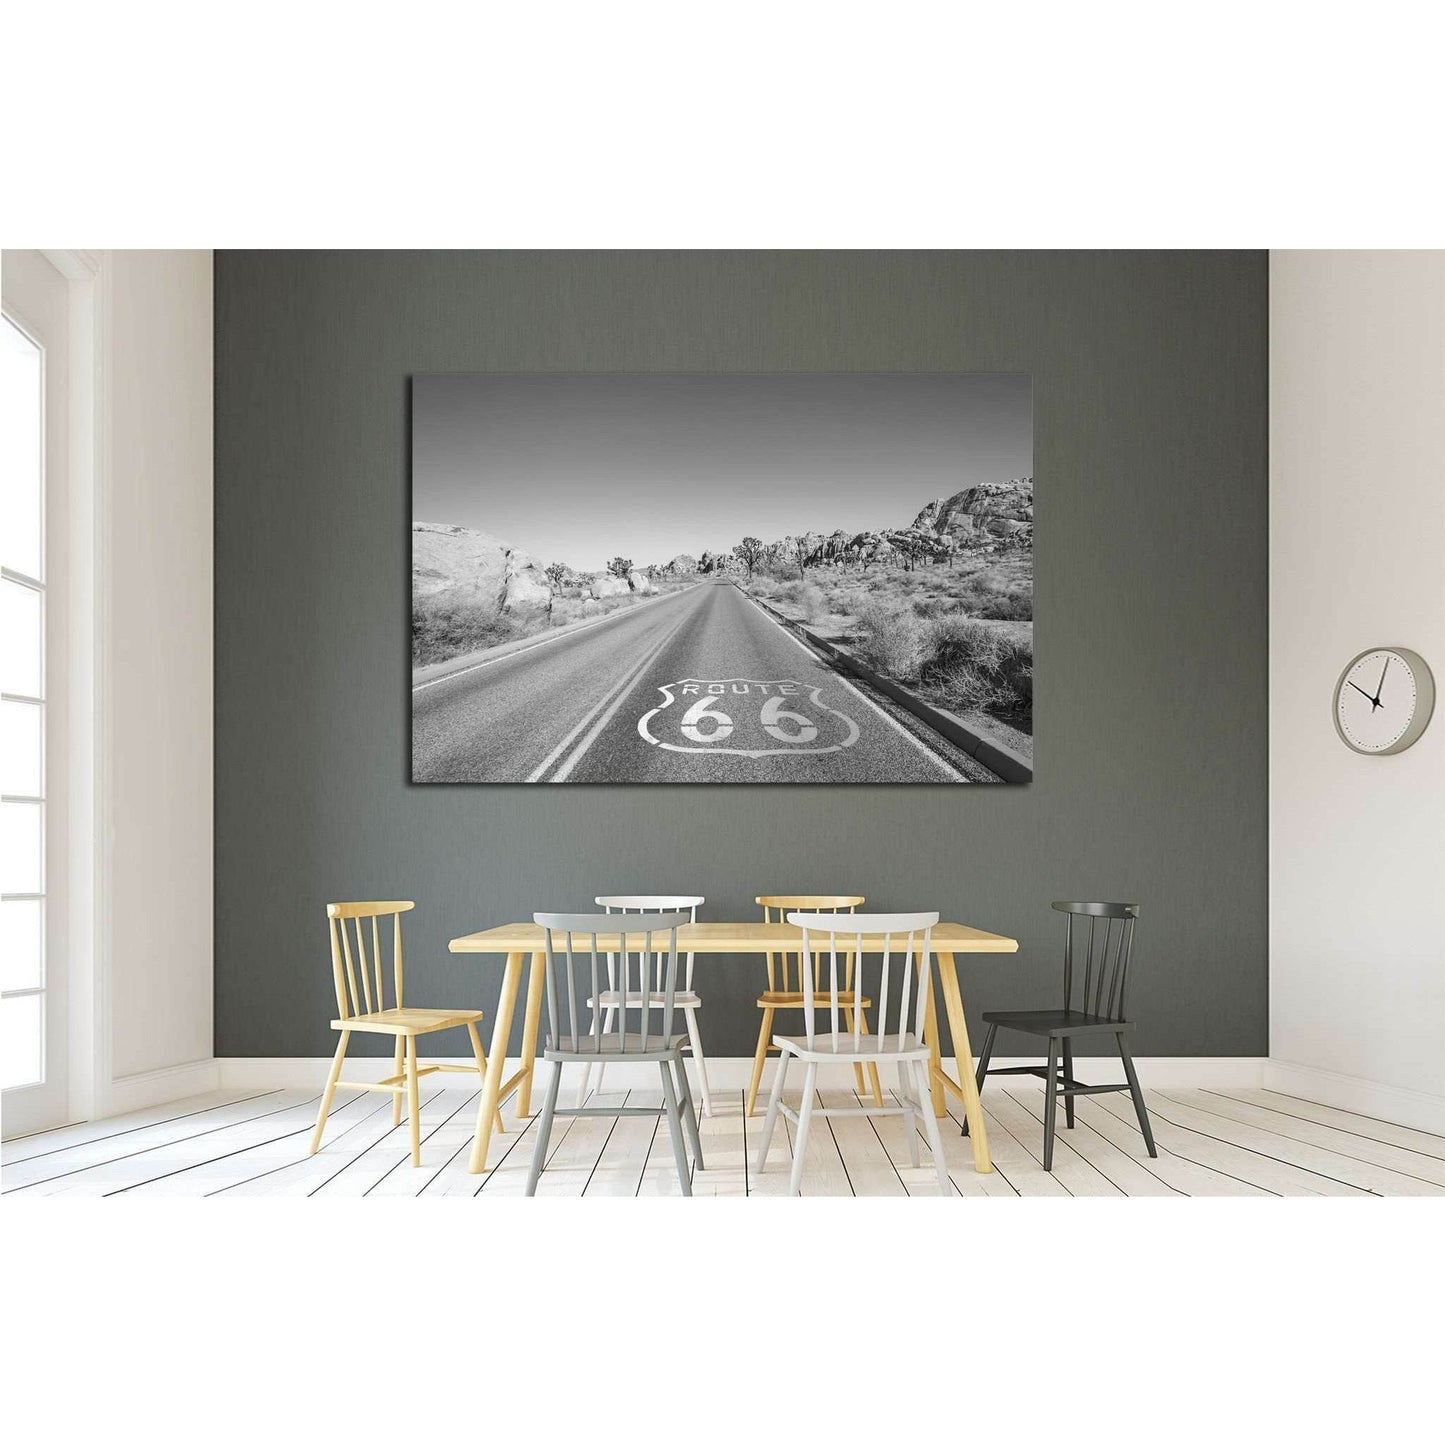 Classic Route 66 Road Trip Wall Decor for Adventurous Home InteriorsThis canvas print features the iconic Route 66 sign on a long, open highway, rendered in striking black and white. The image evokes a sense of freedom and the spirit of the road, perfect